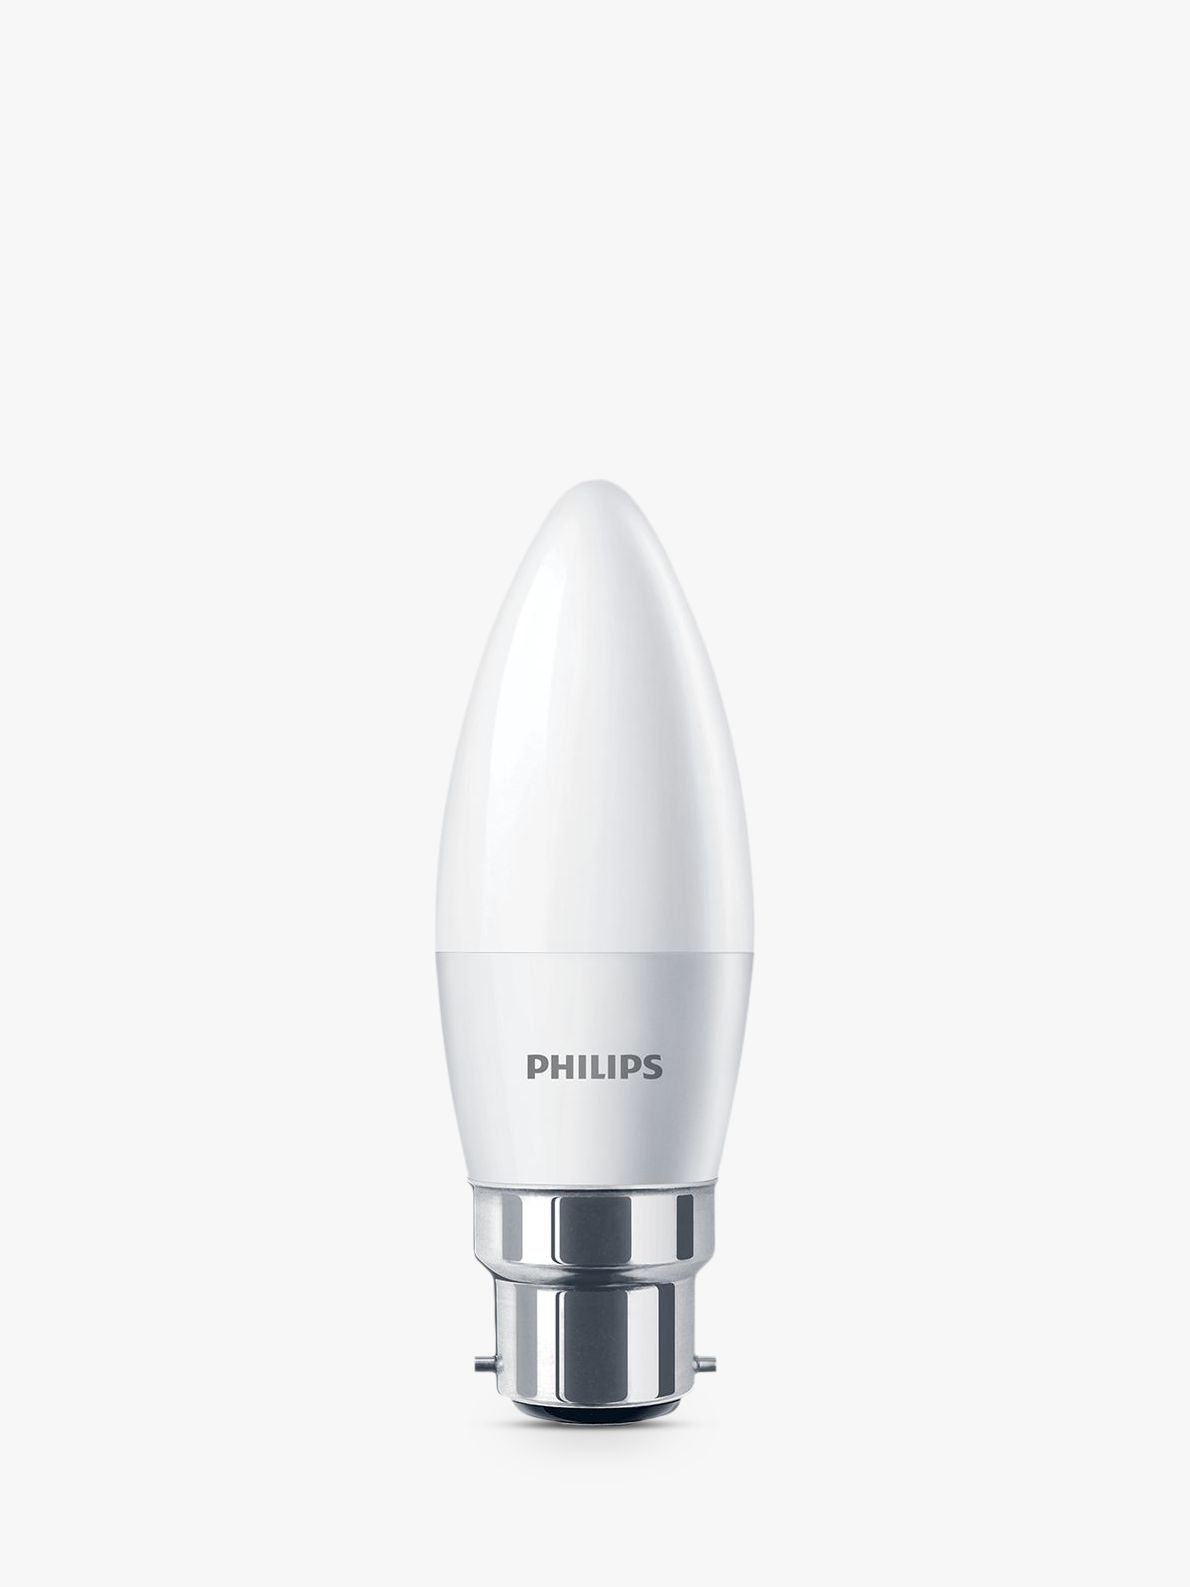 Photo of Philips 2.8w bc led candle light bulb frosted